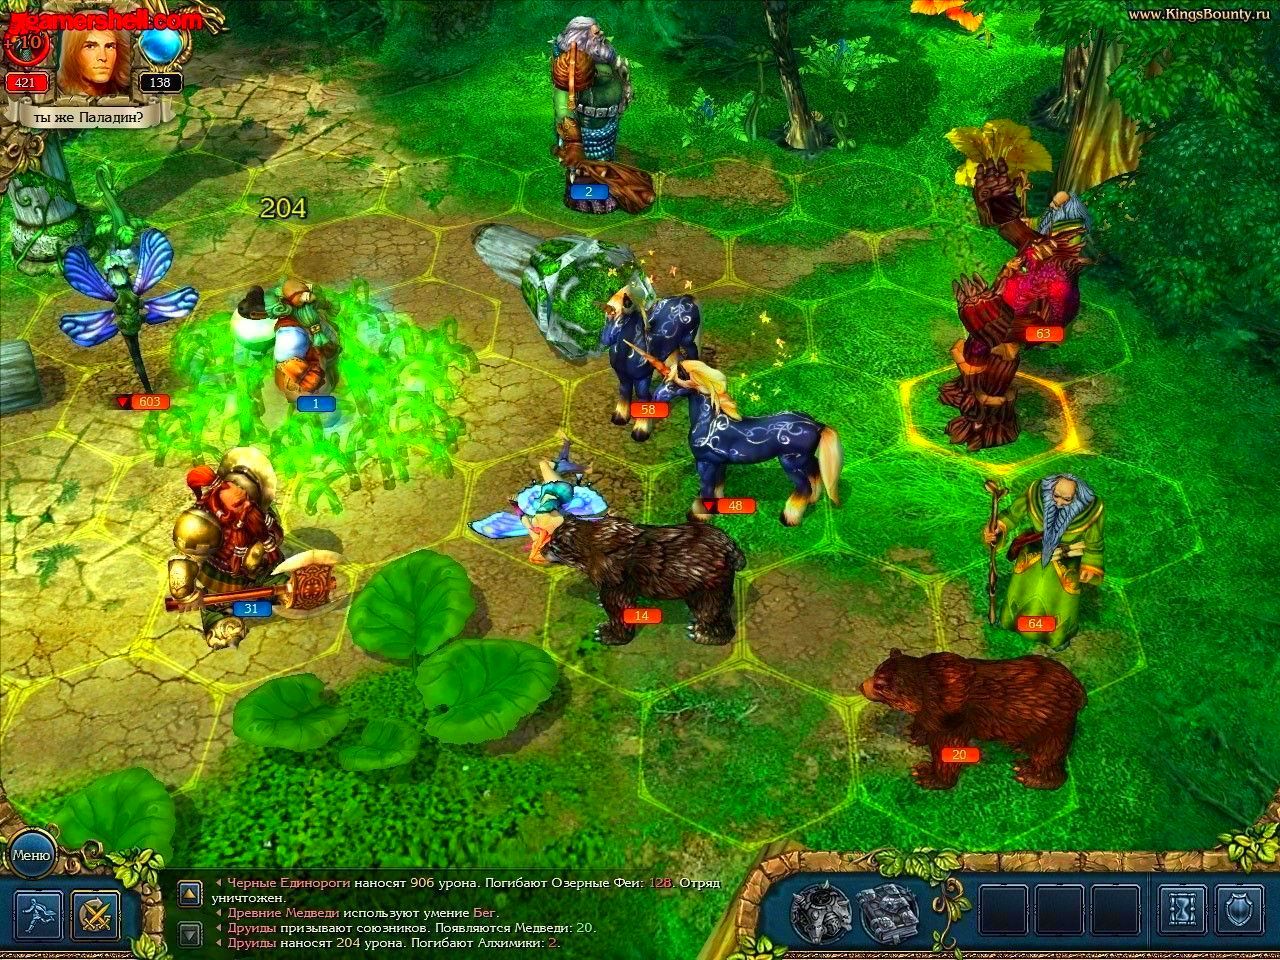 Screenshot from King's Bounty: The Legend (1/3)